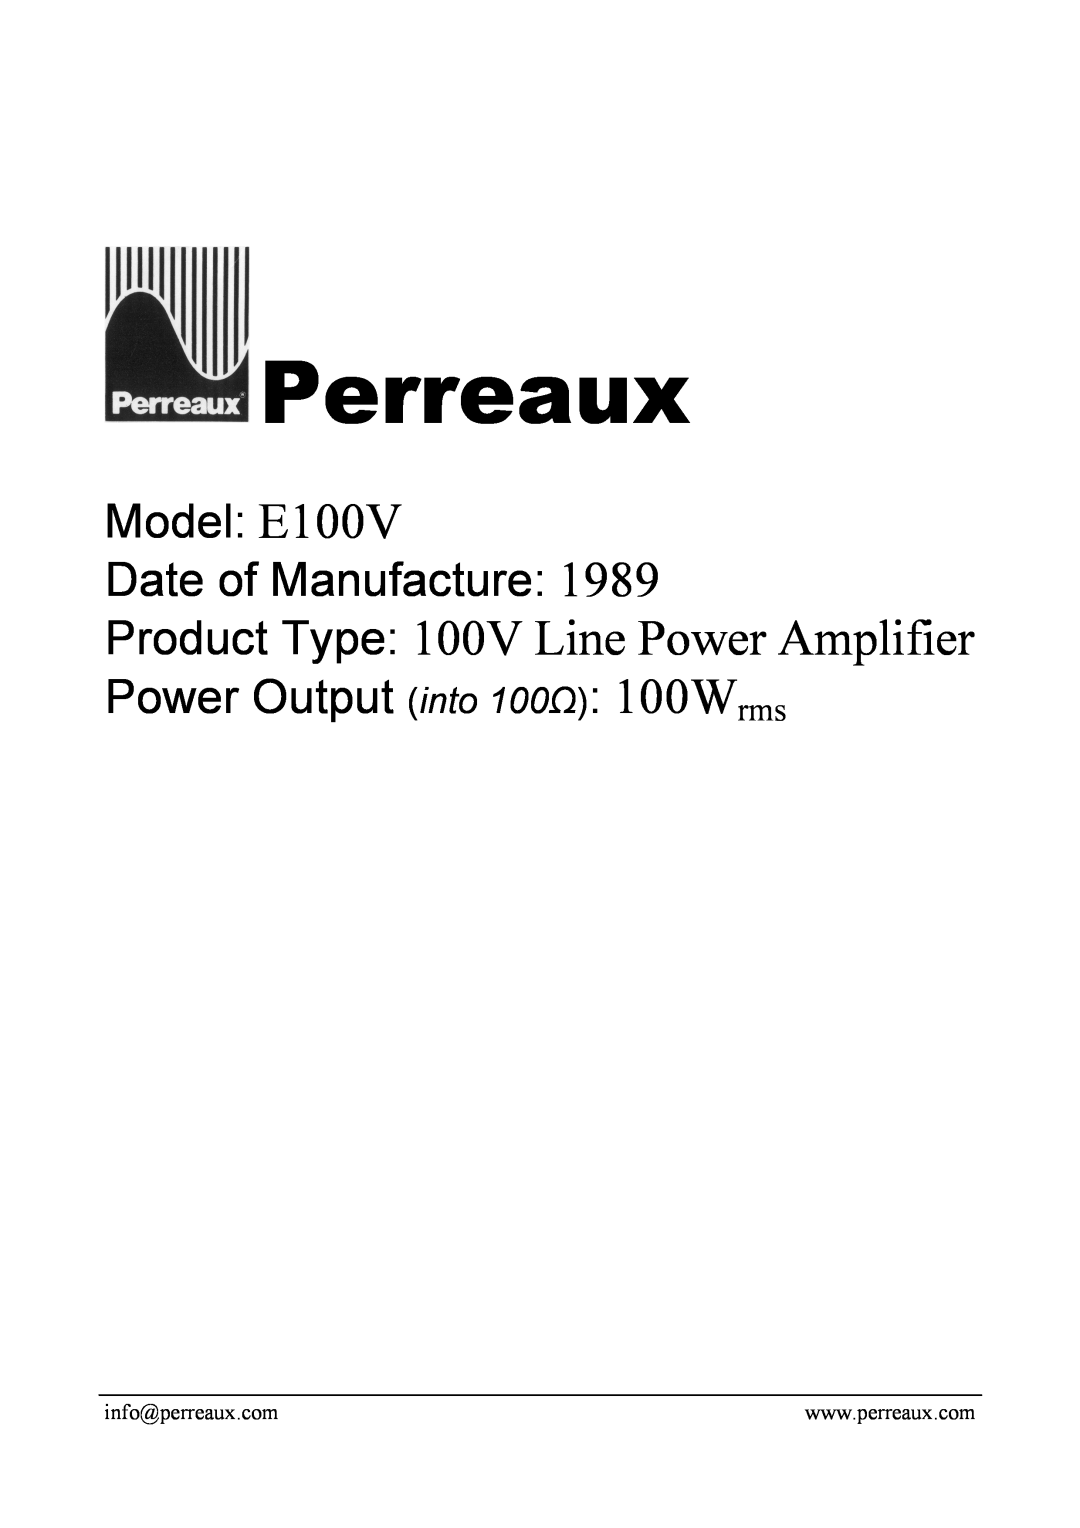 Perreaux manual Perreaux, Product Type 100V Line Power Amplifier, Model E100V Date of Manufacture 